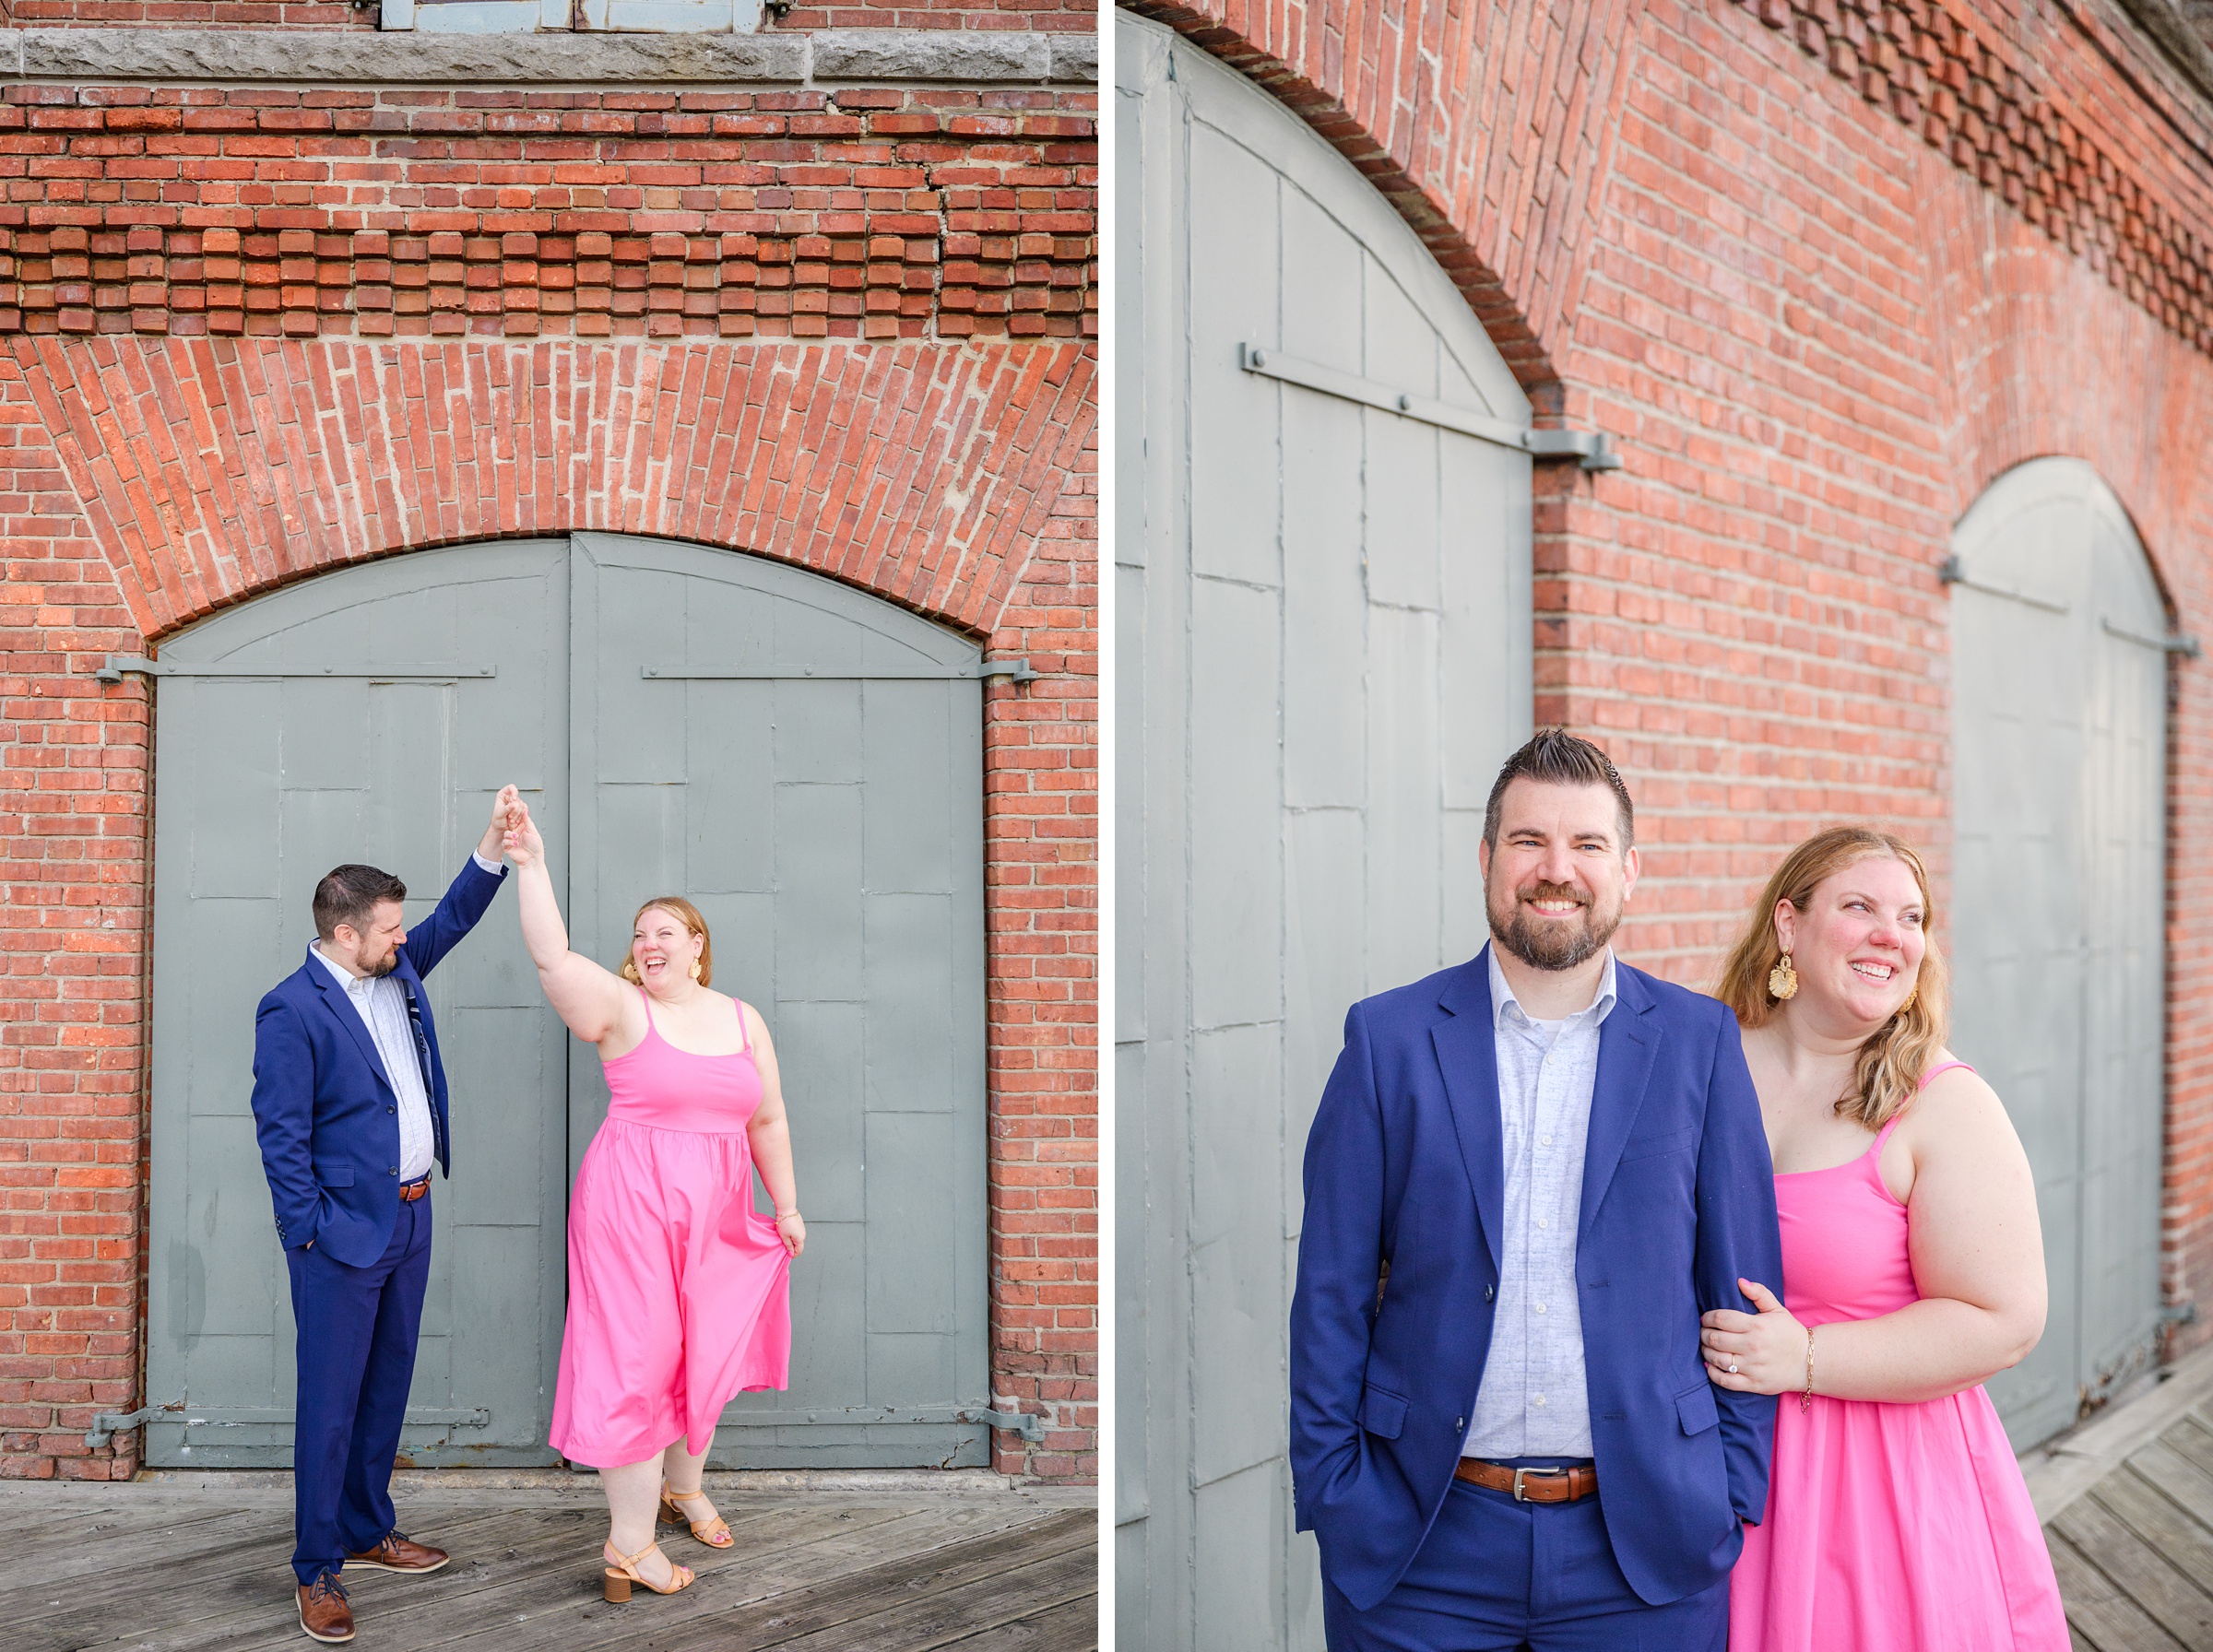 Engaged couple at Fells Point Waterfront for their sunrise engagement session in Baltimore, Maryland photographed by Baltimore Wedding Photographer Cait Kramer Photography.